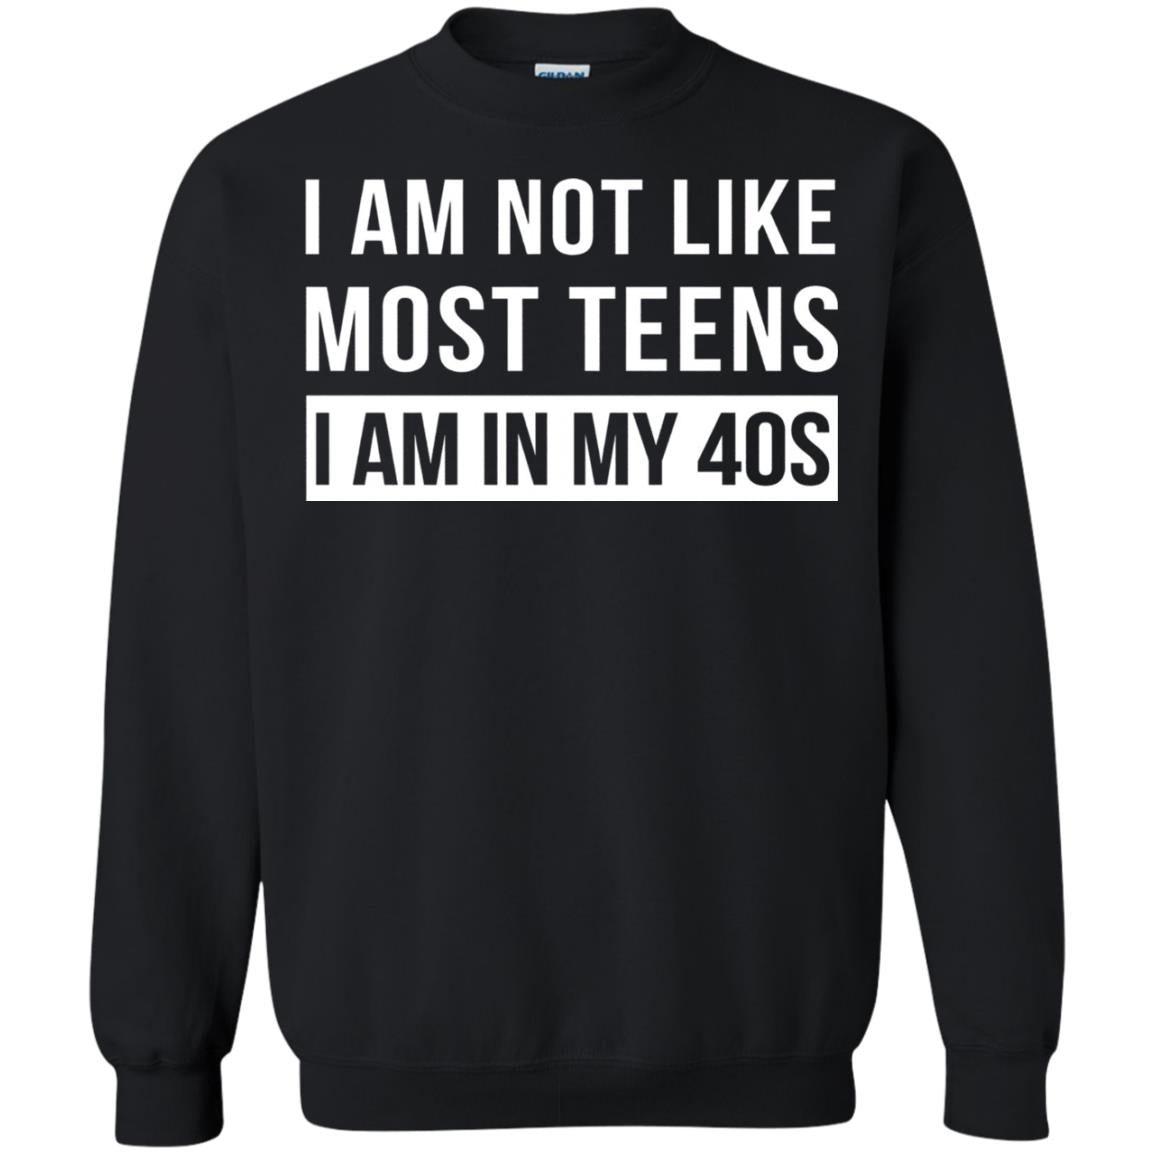 I Am Not Like Most Teens I Am In My 40s Shirt